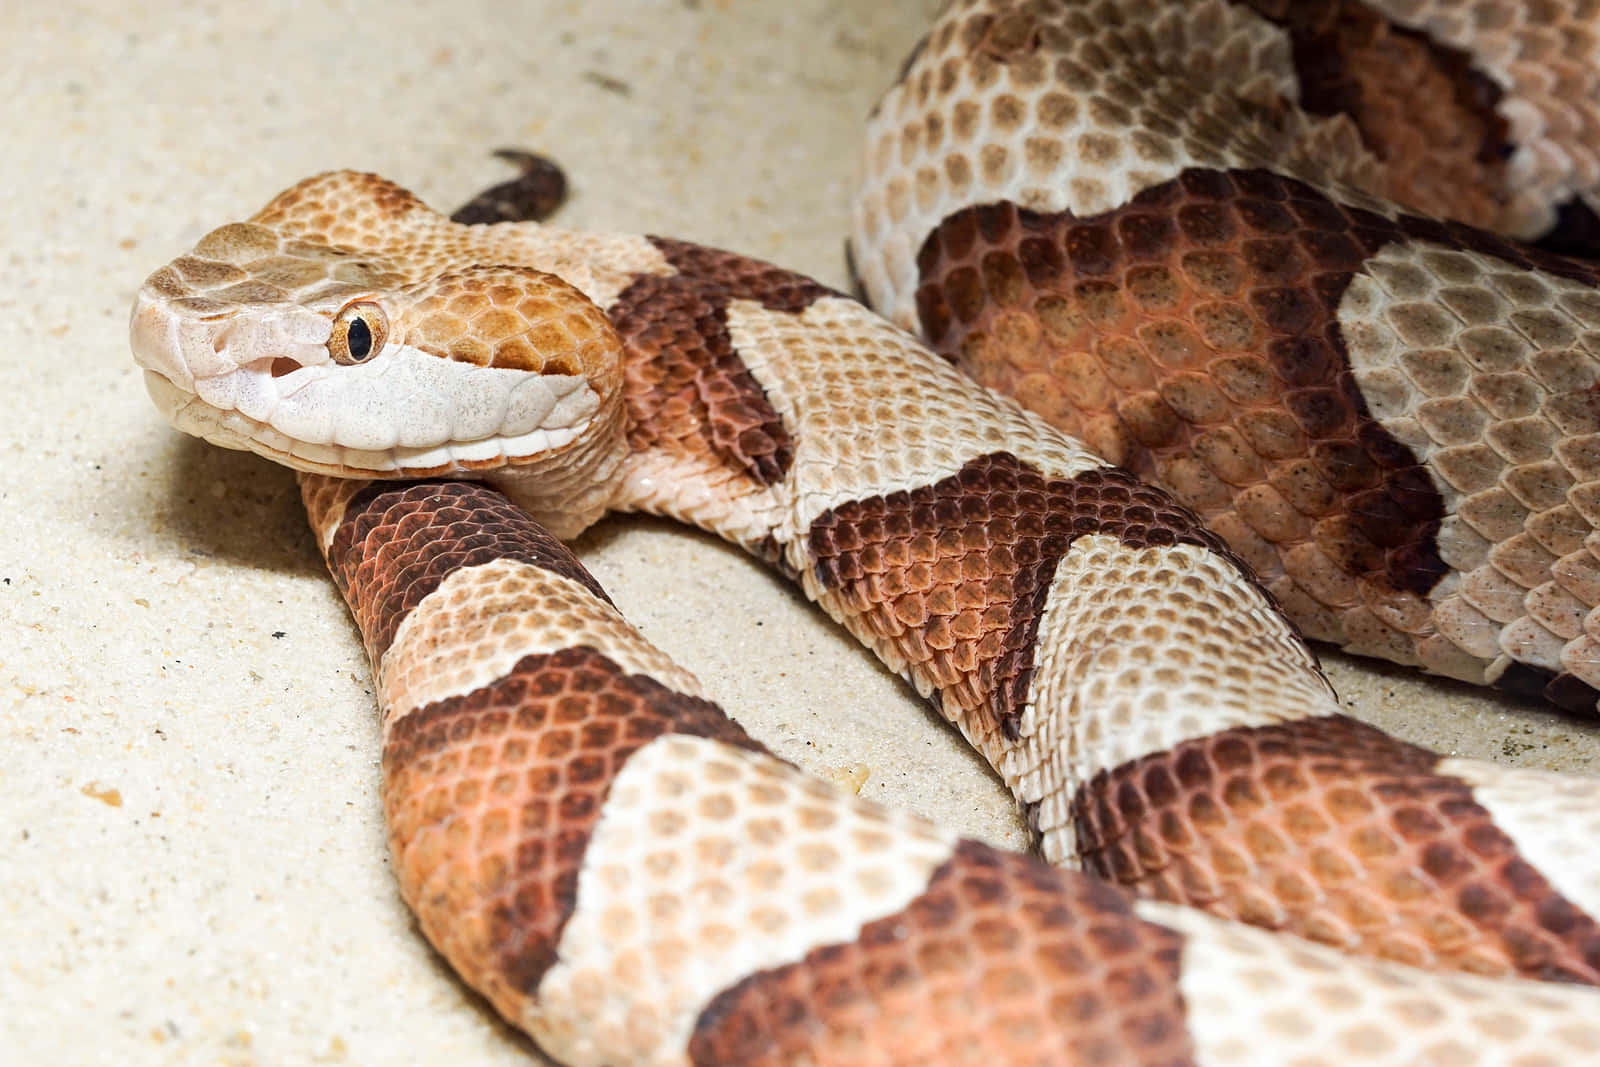 Up Close and Personal With a Copperhead Snake